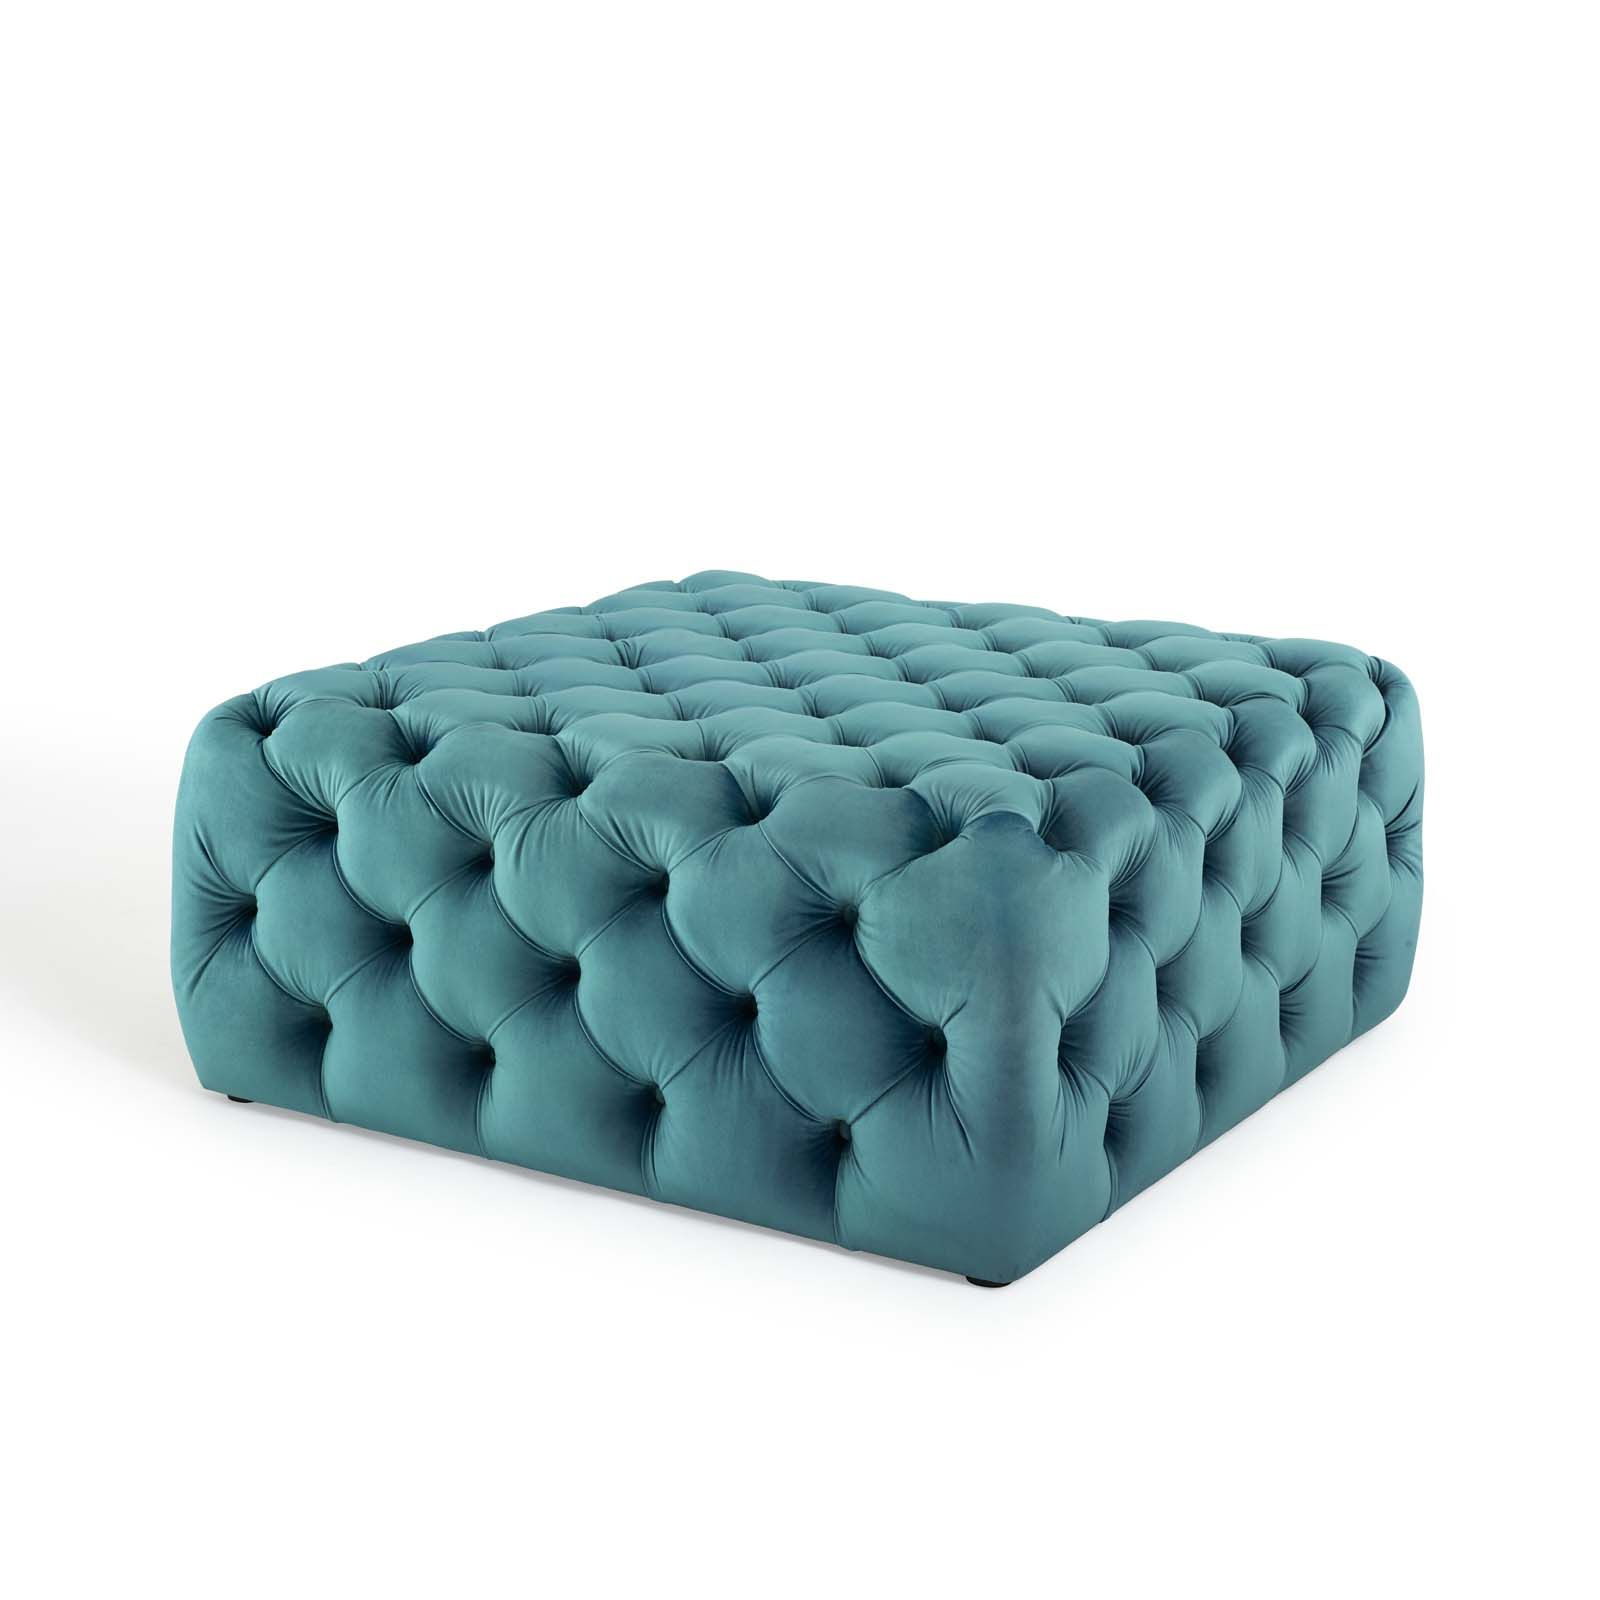 2019 Anthem Tufted Button Large Square Performance Velvet Ottoman Sea Blue Pertaining To Light Gray Velvet Fabric Accent Ottomans (View 3 of 10)